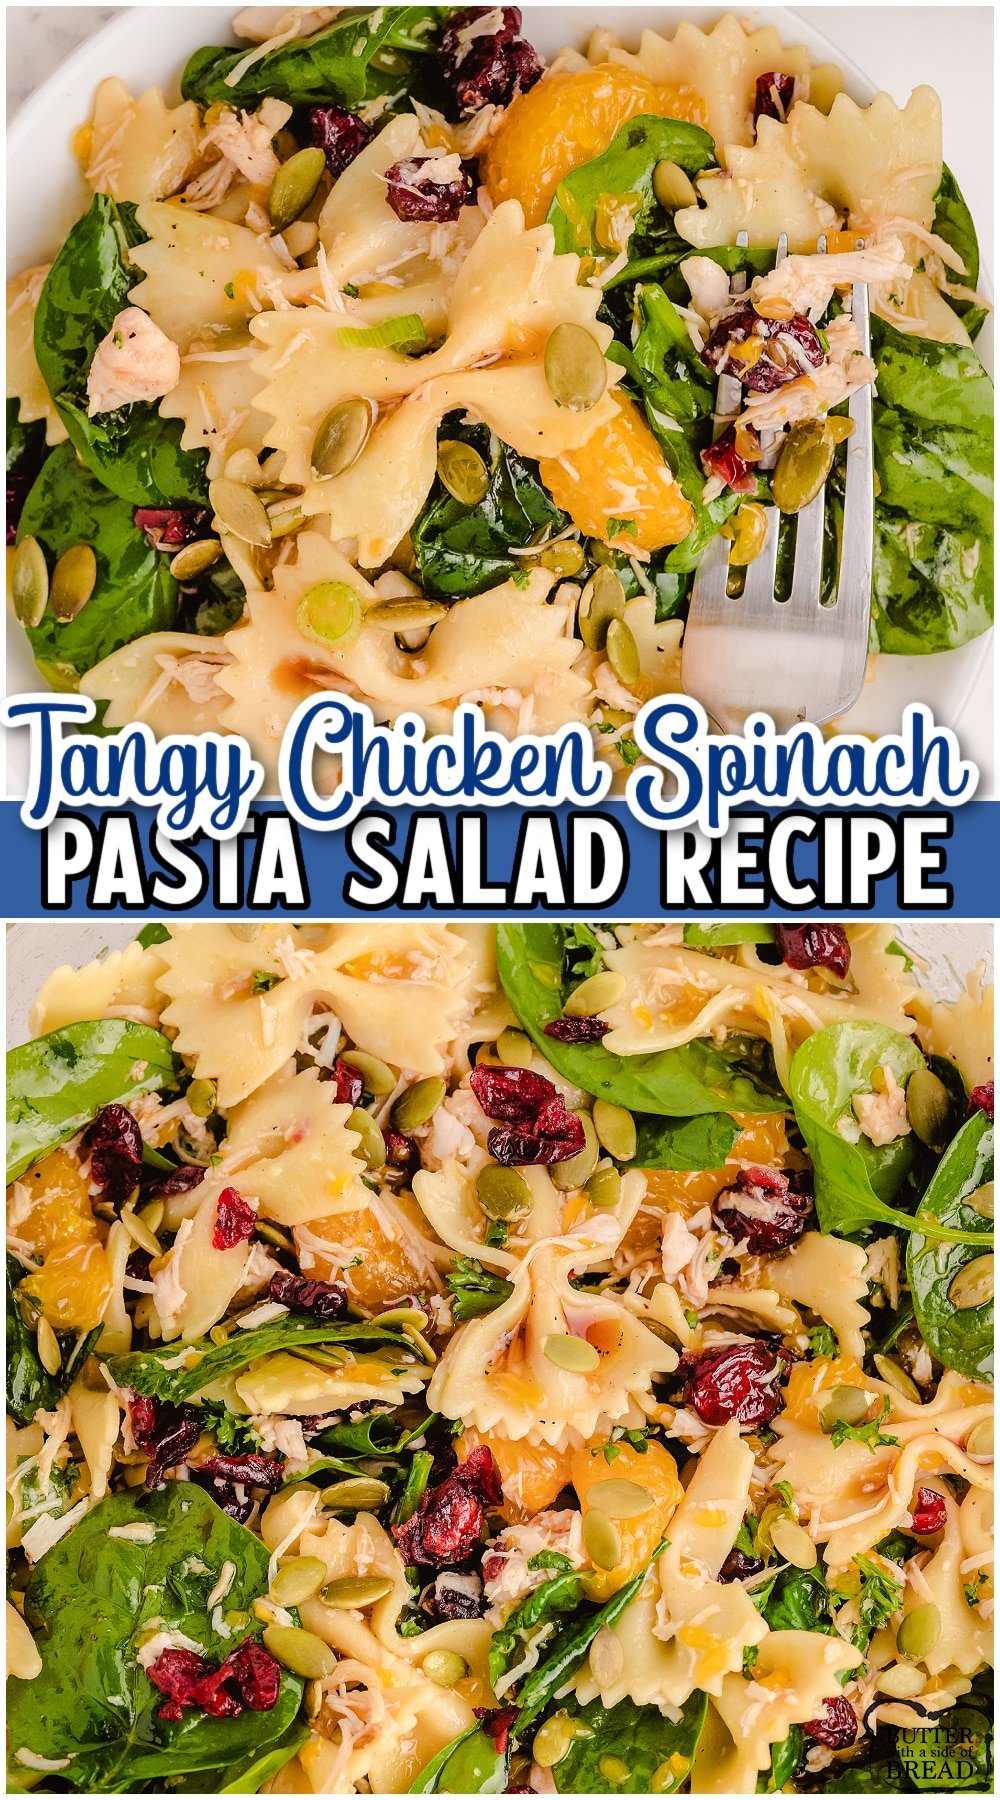 Spinach Chicken Pasta Salad made with rotisserie chicken, pasta, fresh spinach & tangy oranges then tossed with an easy teriyaki vinaigrette! Perfect summer salad with incredible flavor everyone loves!